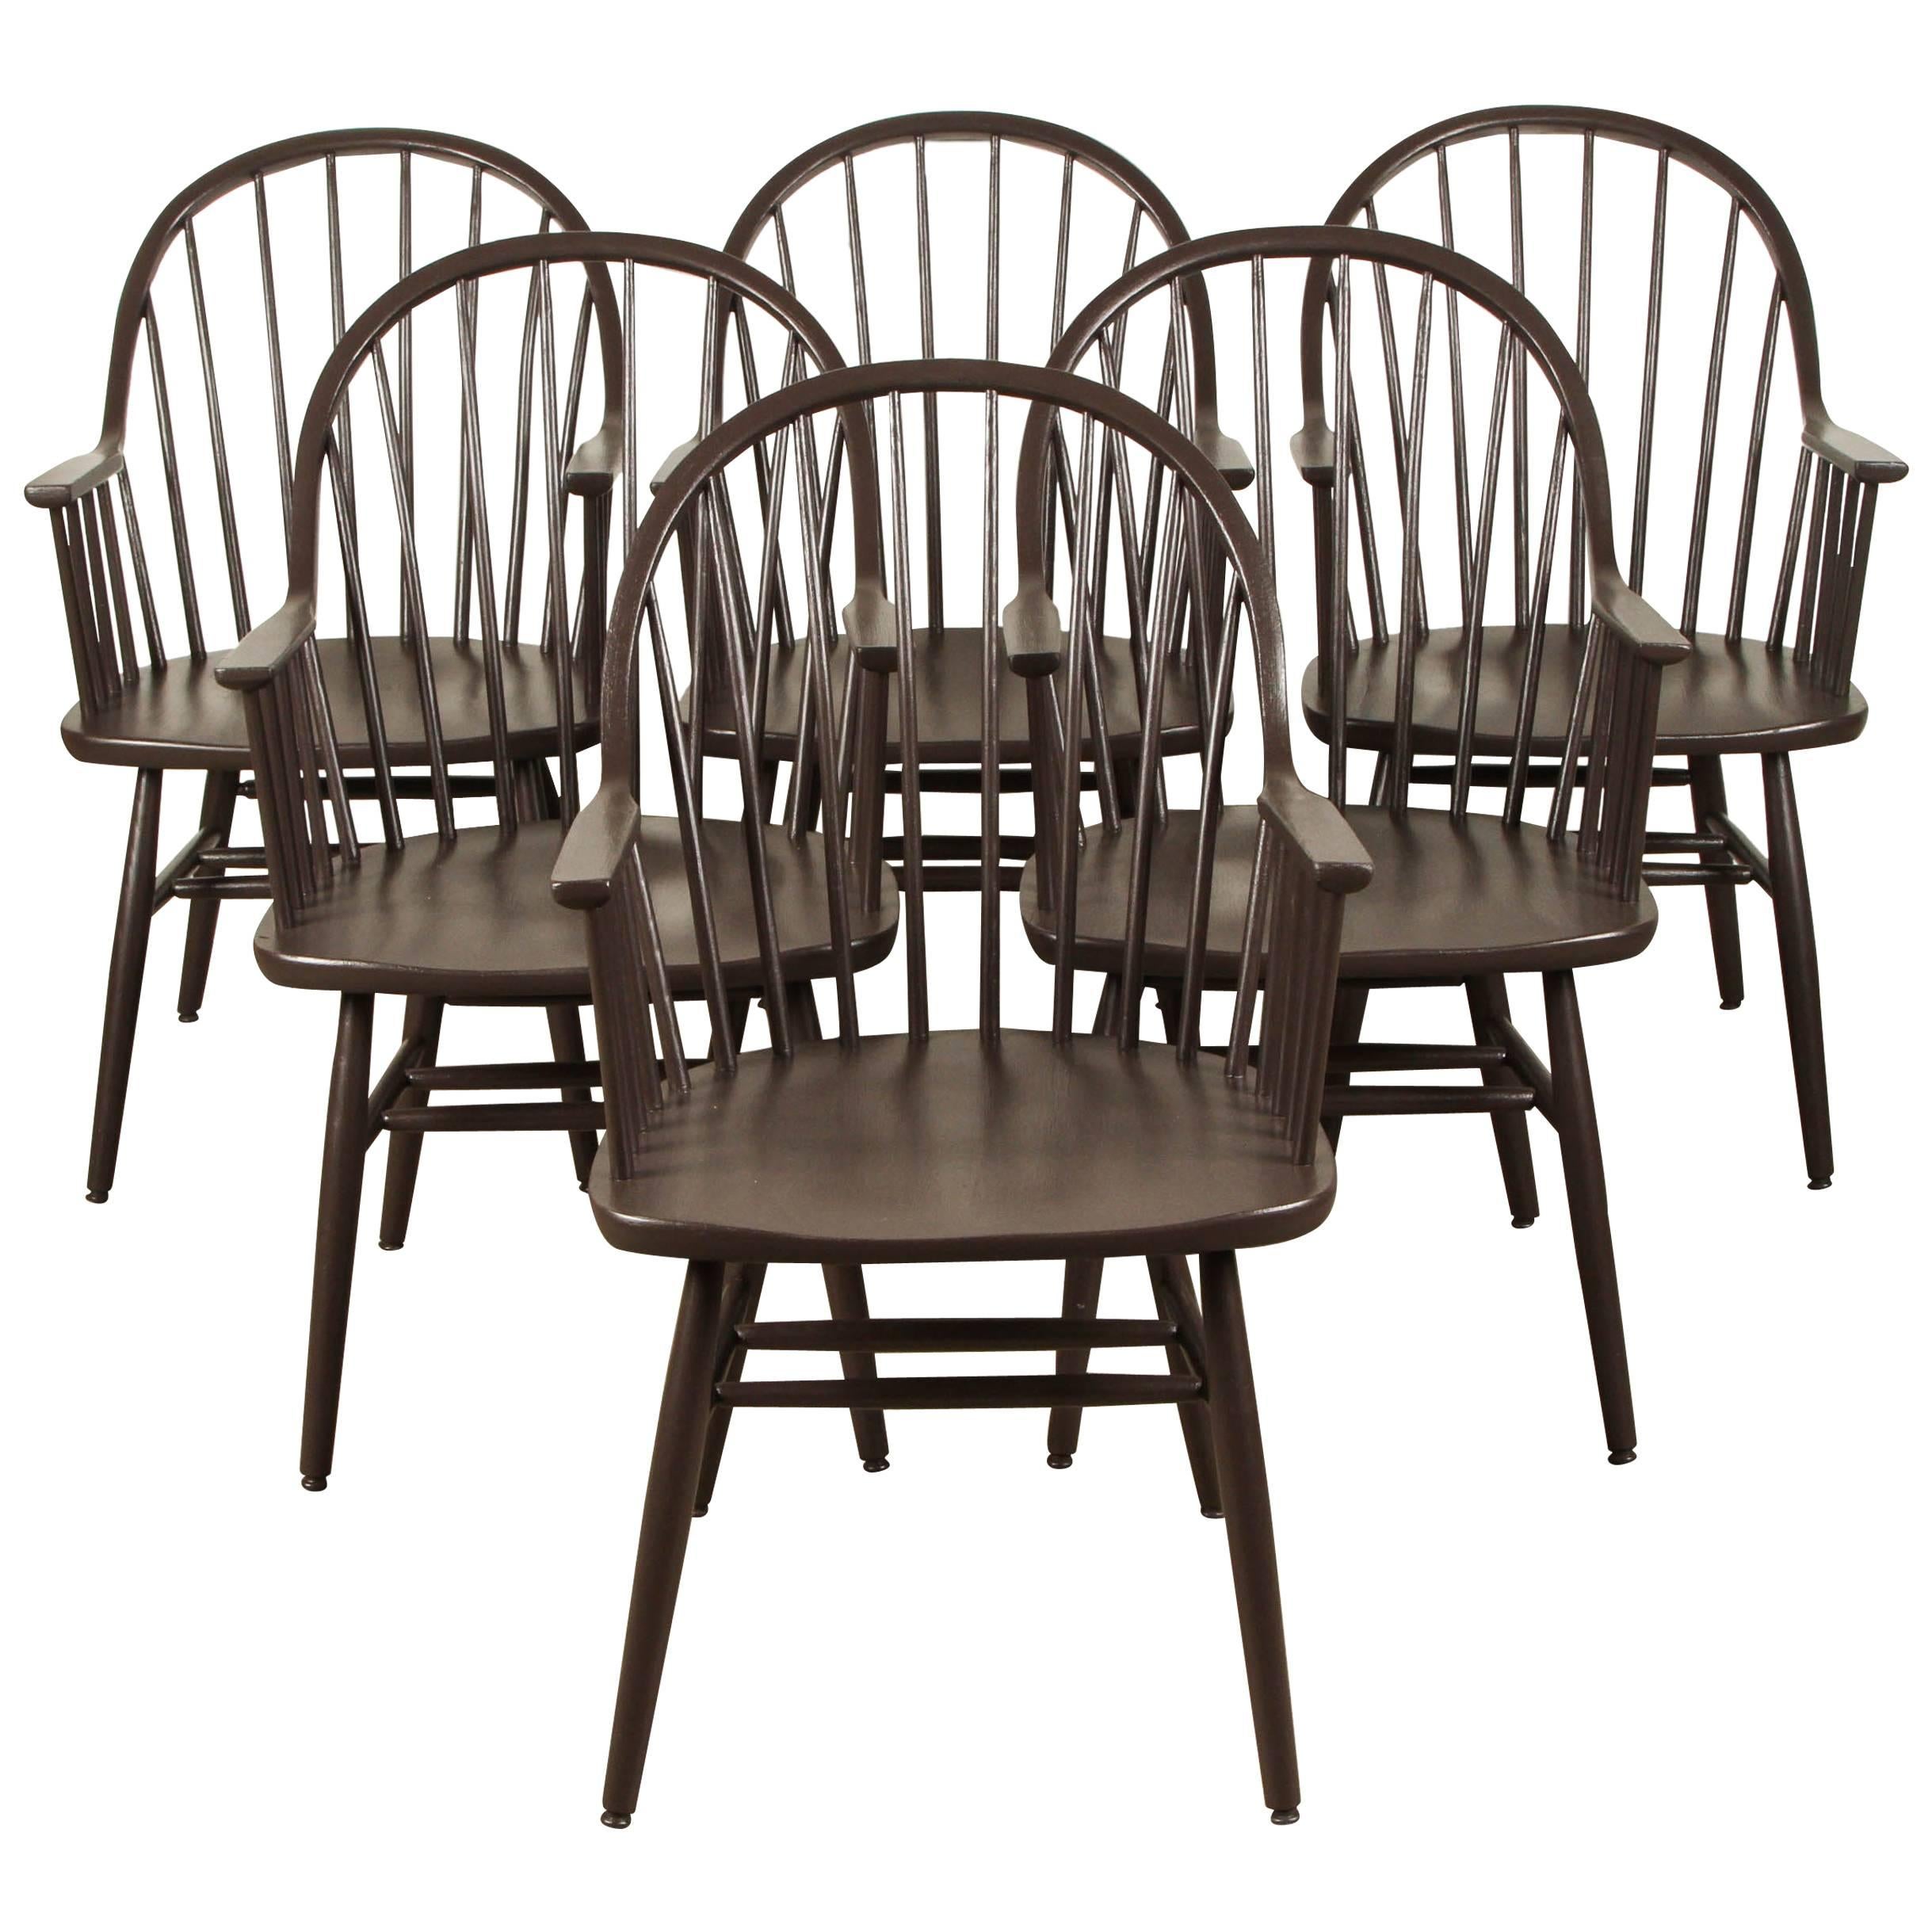 Set of Six-Painted Windsor Style Spindle Back Dining Chairs